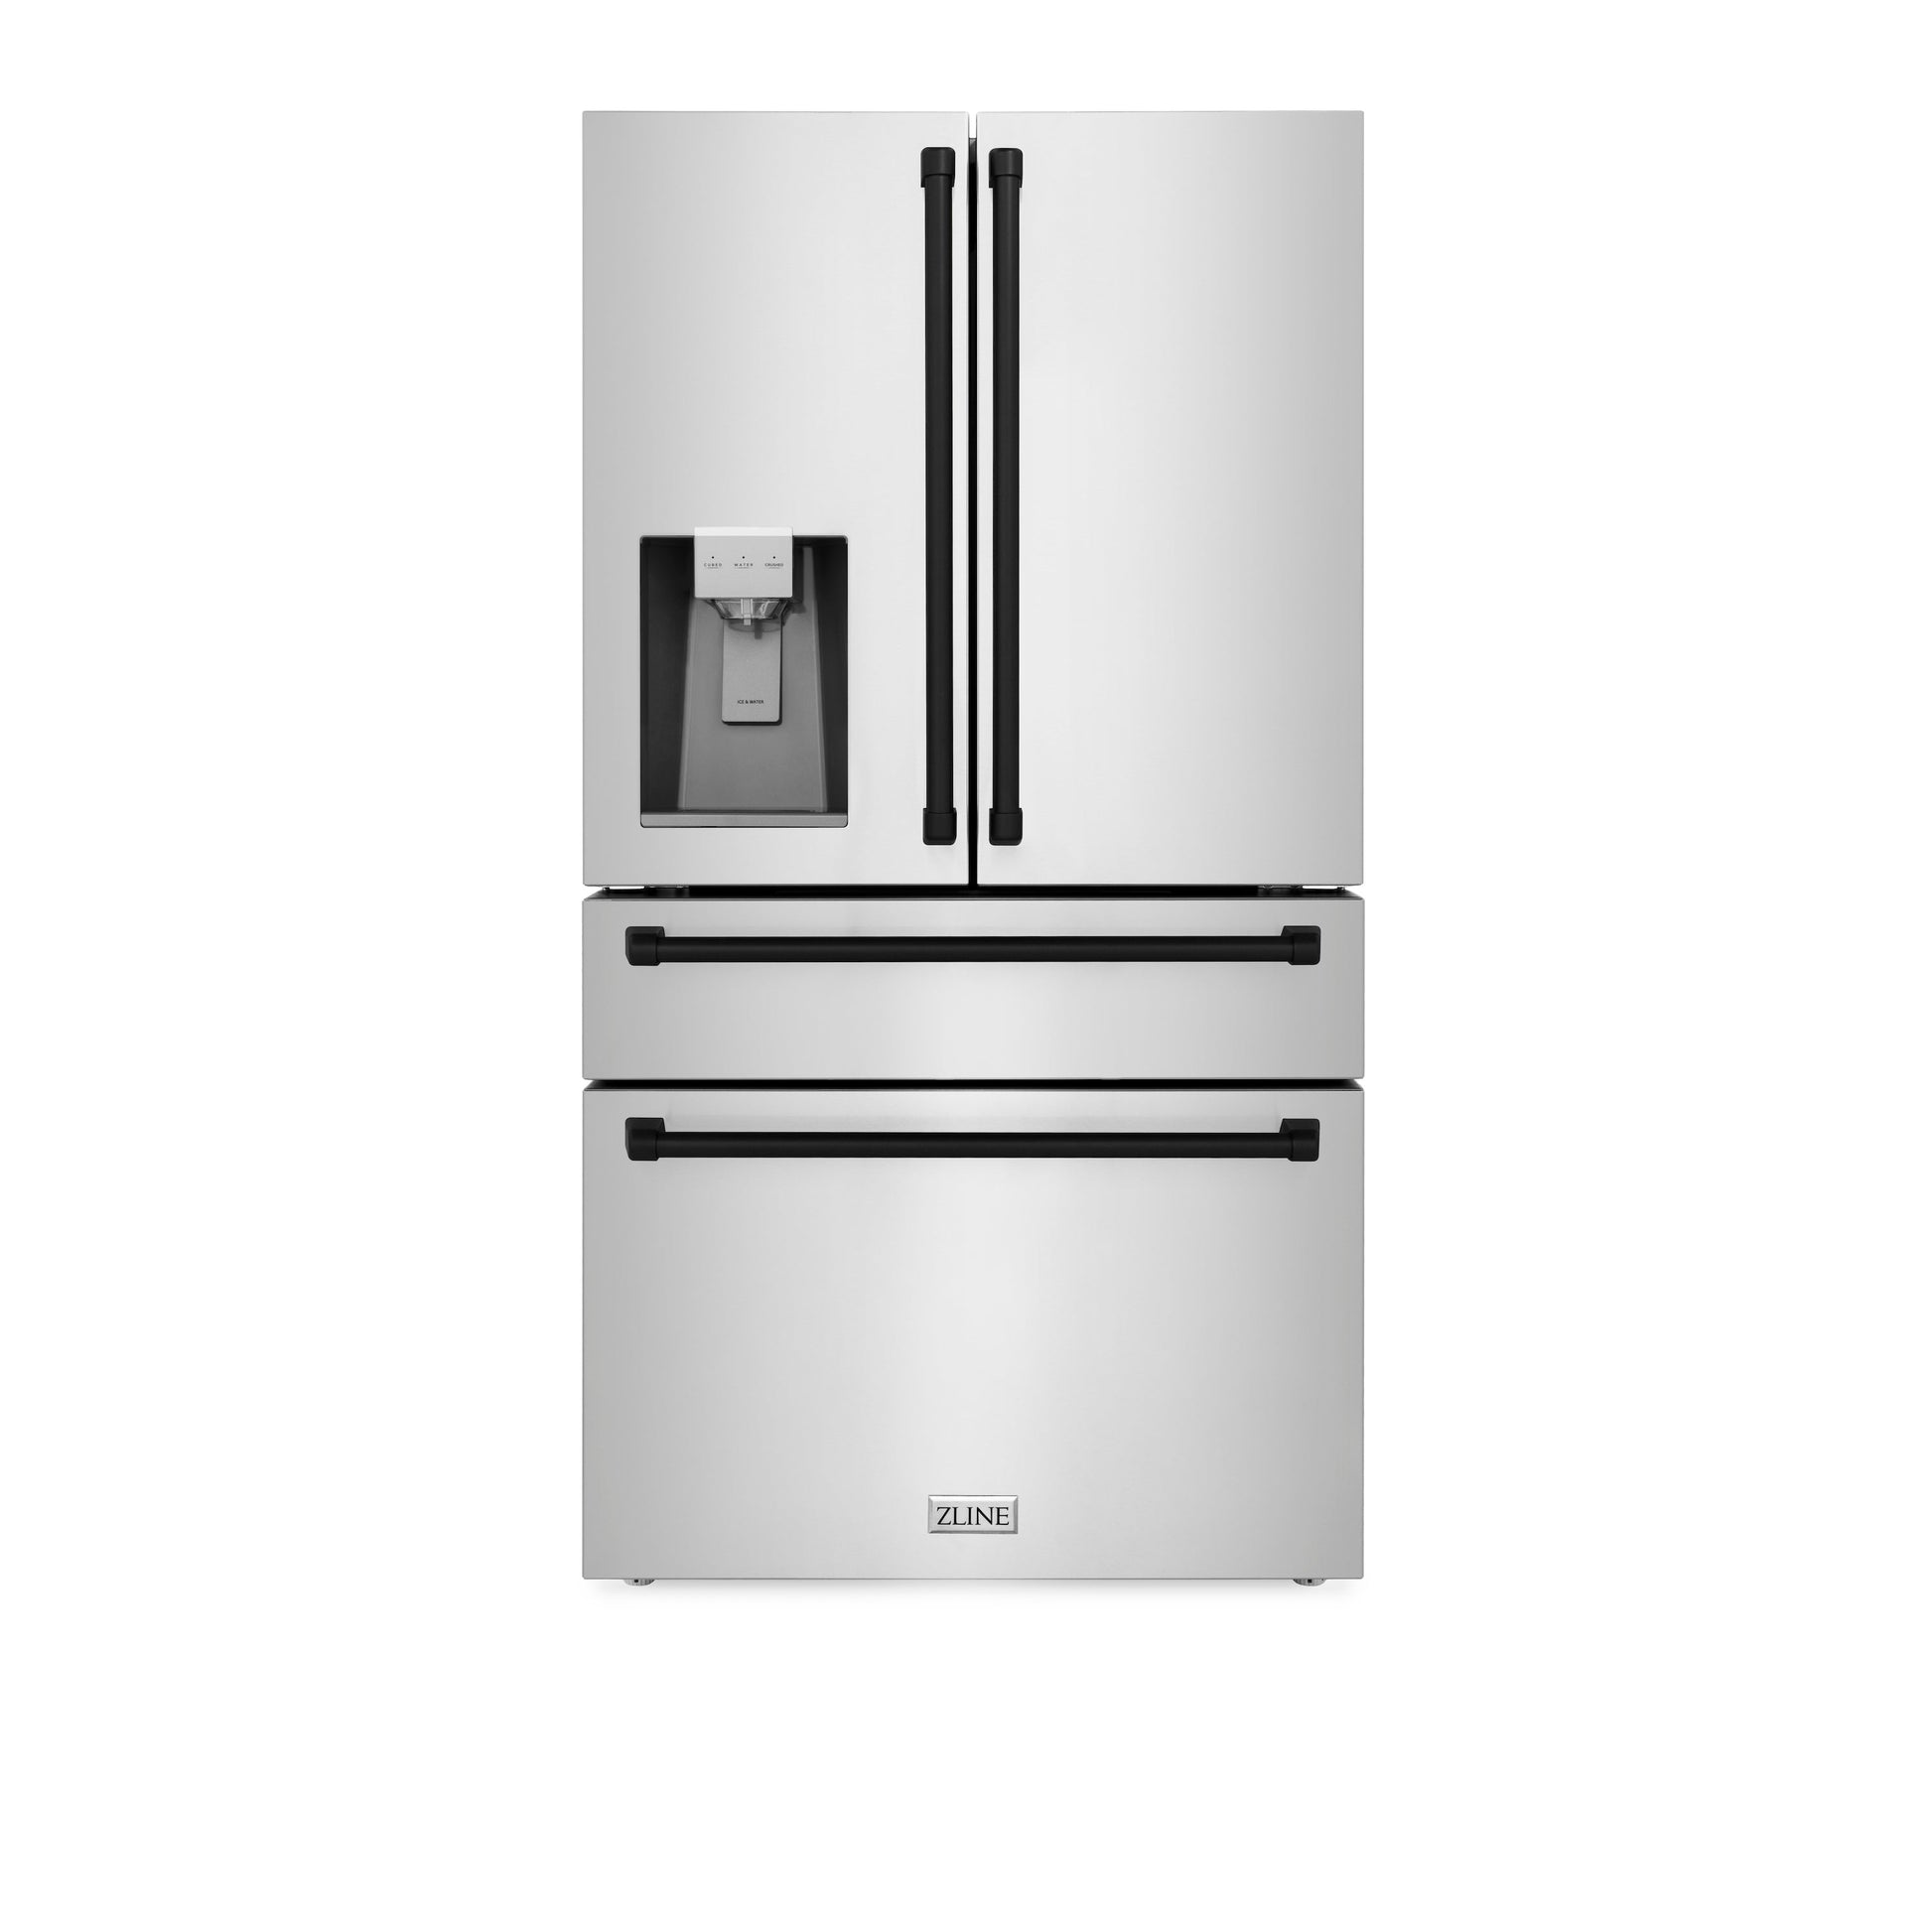 ZLINE Autograph Edition 36 in. 21.6 cu. ft Freestanding French Door Refrigerator with Water Dispenser in Stainless Steel with Matte Black Accents (RFMZ-W-36-MB) front.